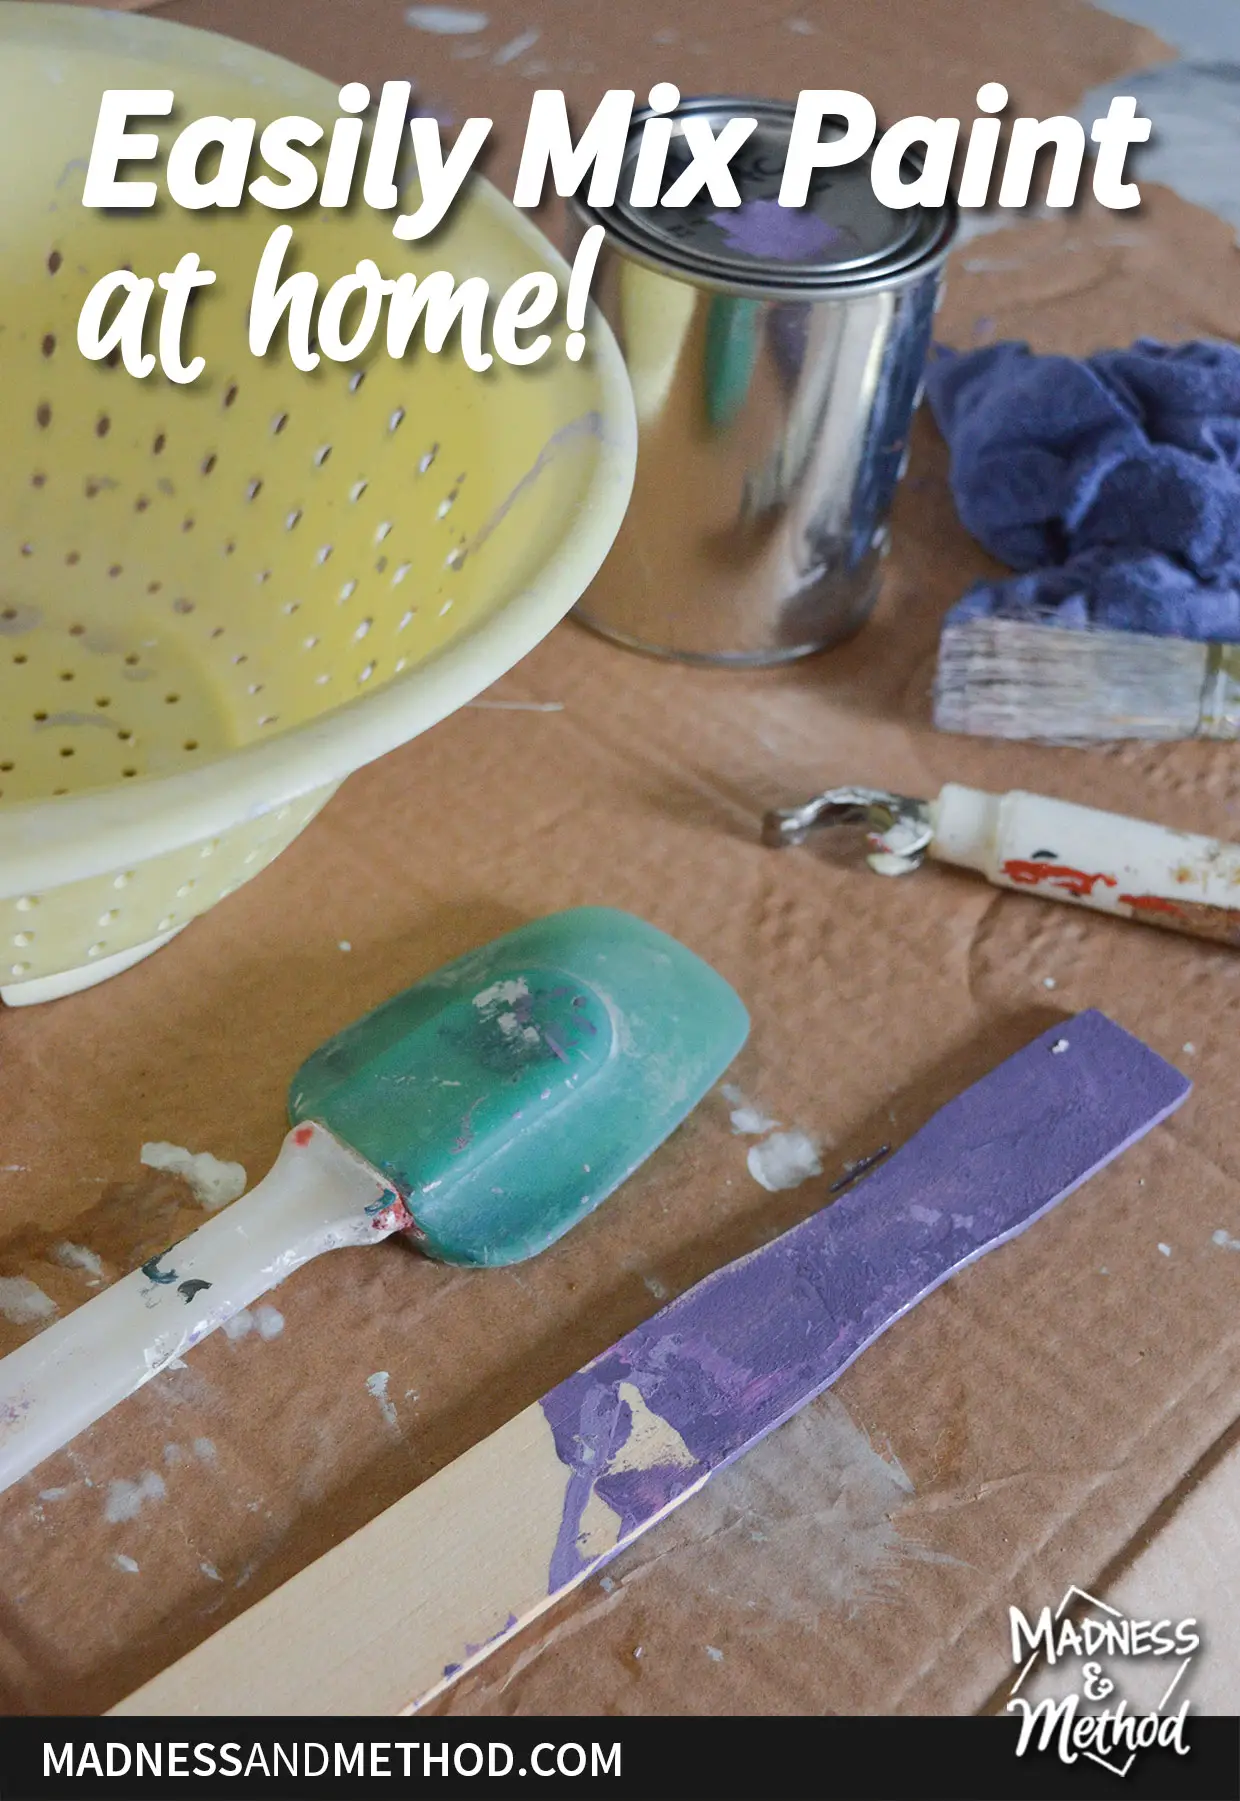 mix paint at home text overlay with spatula and stir stick